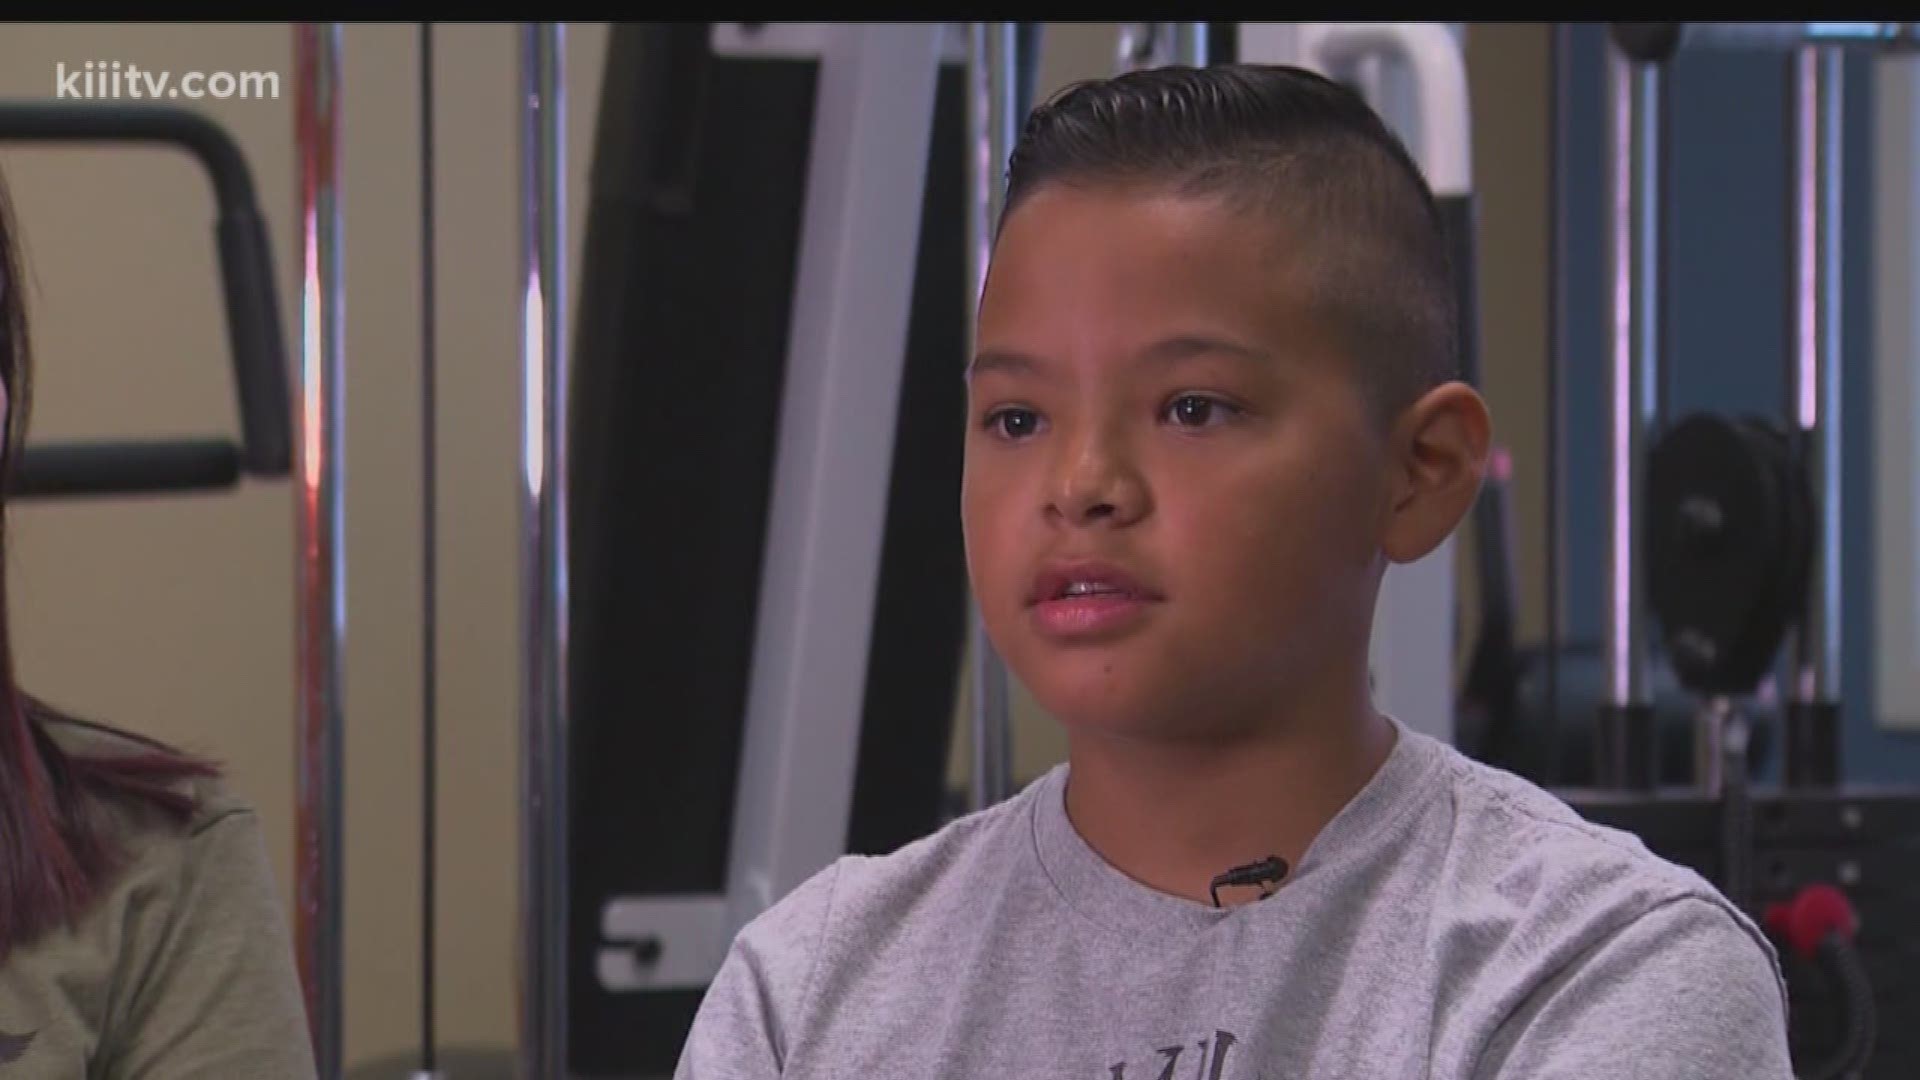 Julian Maldonado was taken to Driscoll Children's Hospital with what was believed to be a stomach virus. It turned out to be a potentially deadly infection.